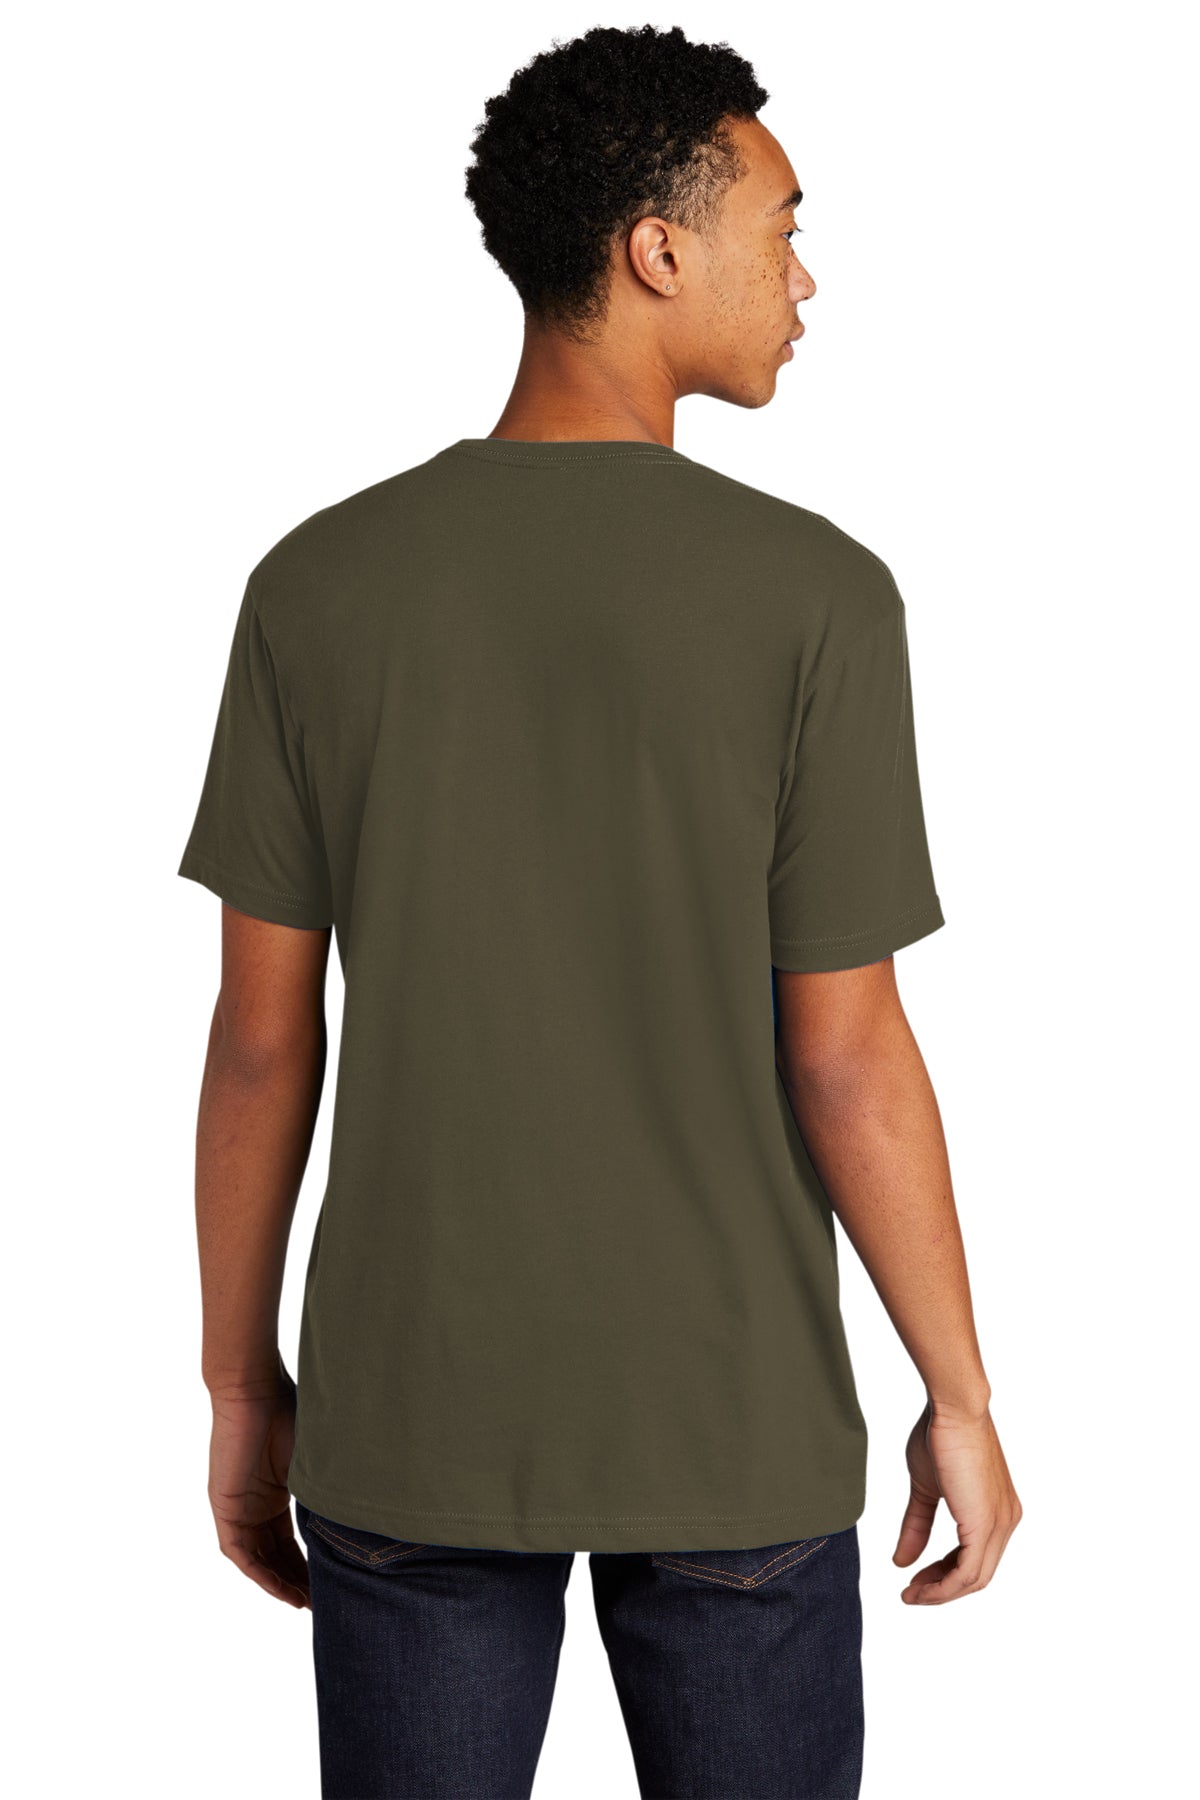 Next Level Unisex CVC Sueded Branded Tee's, Military Green